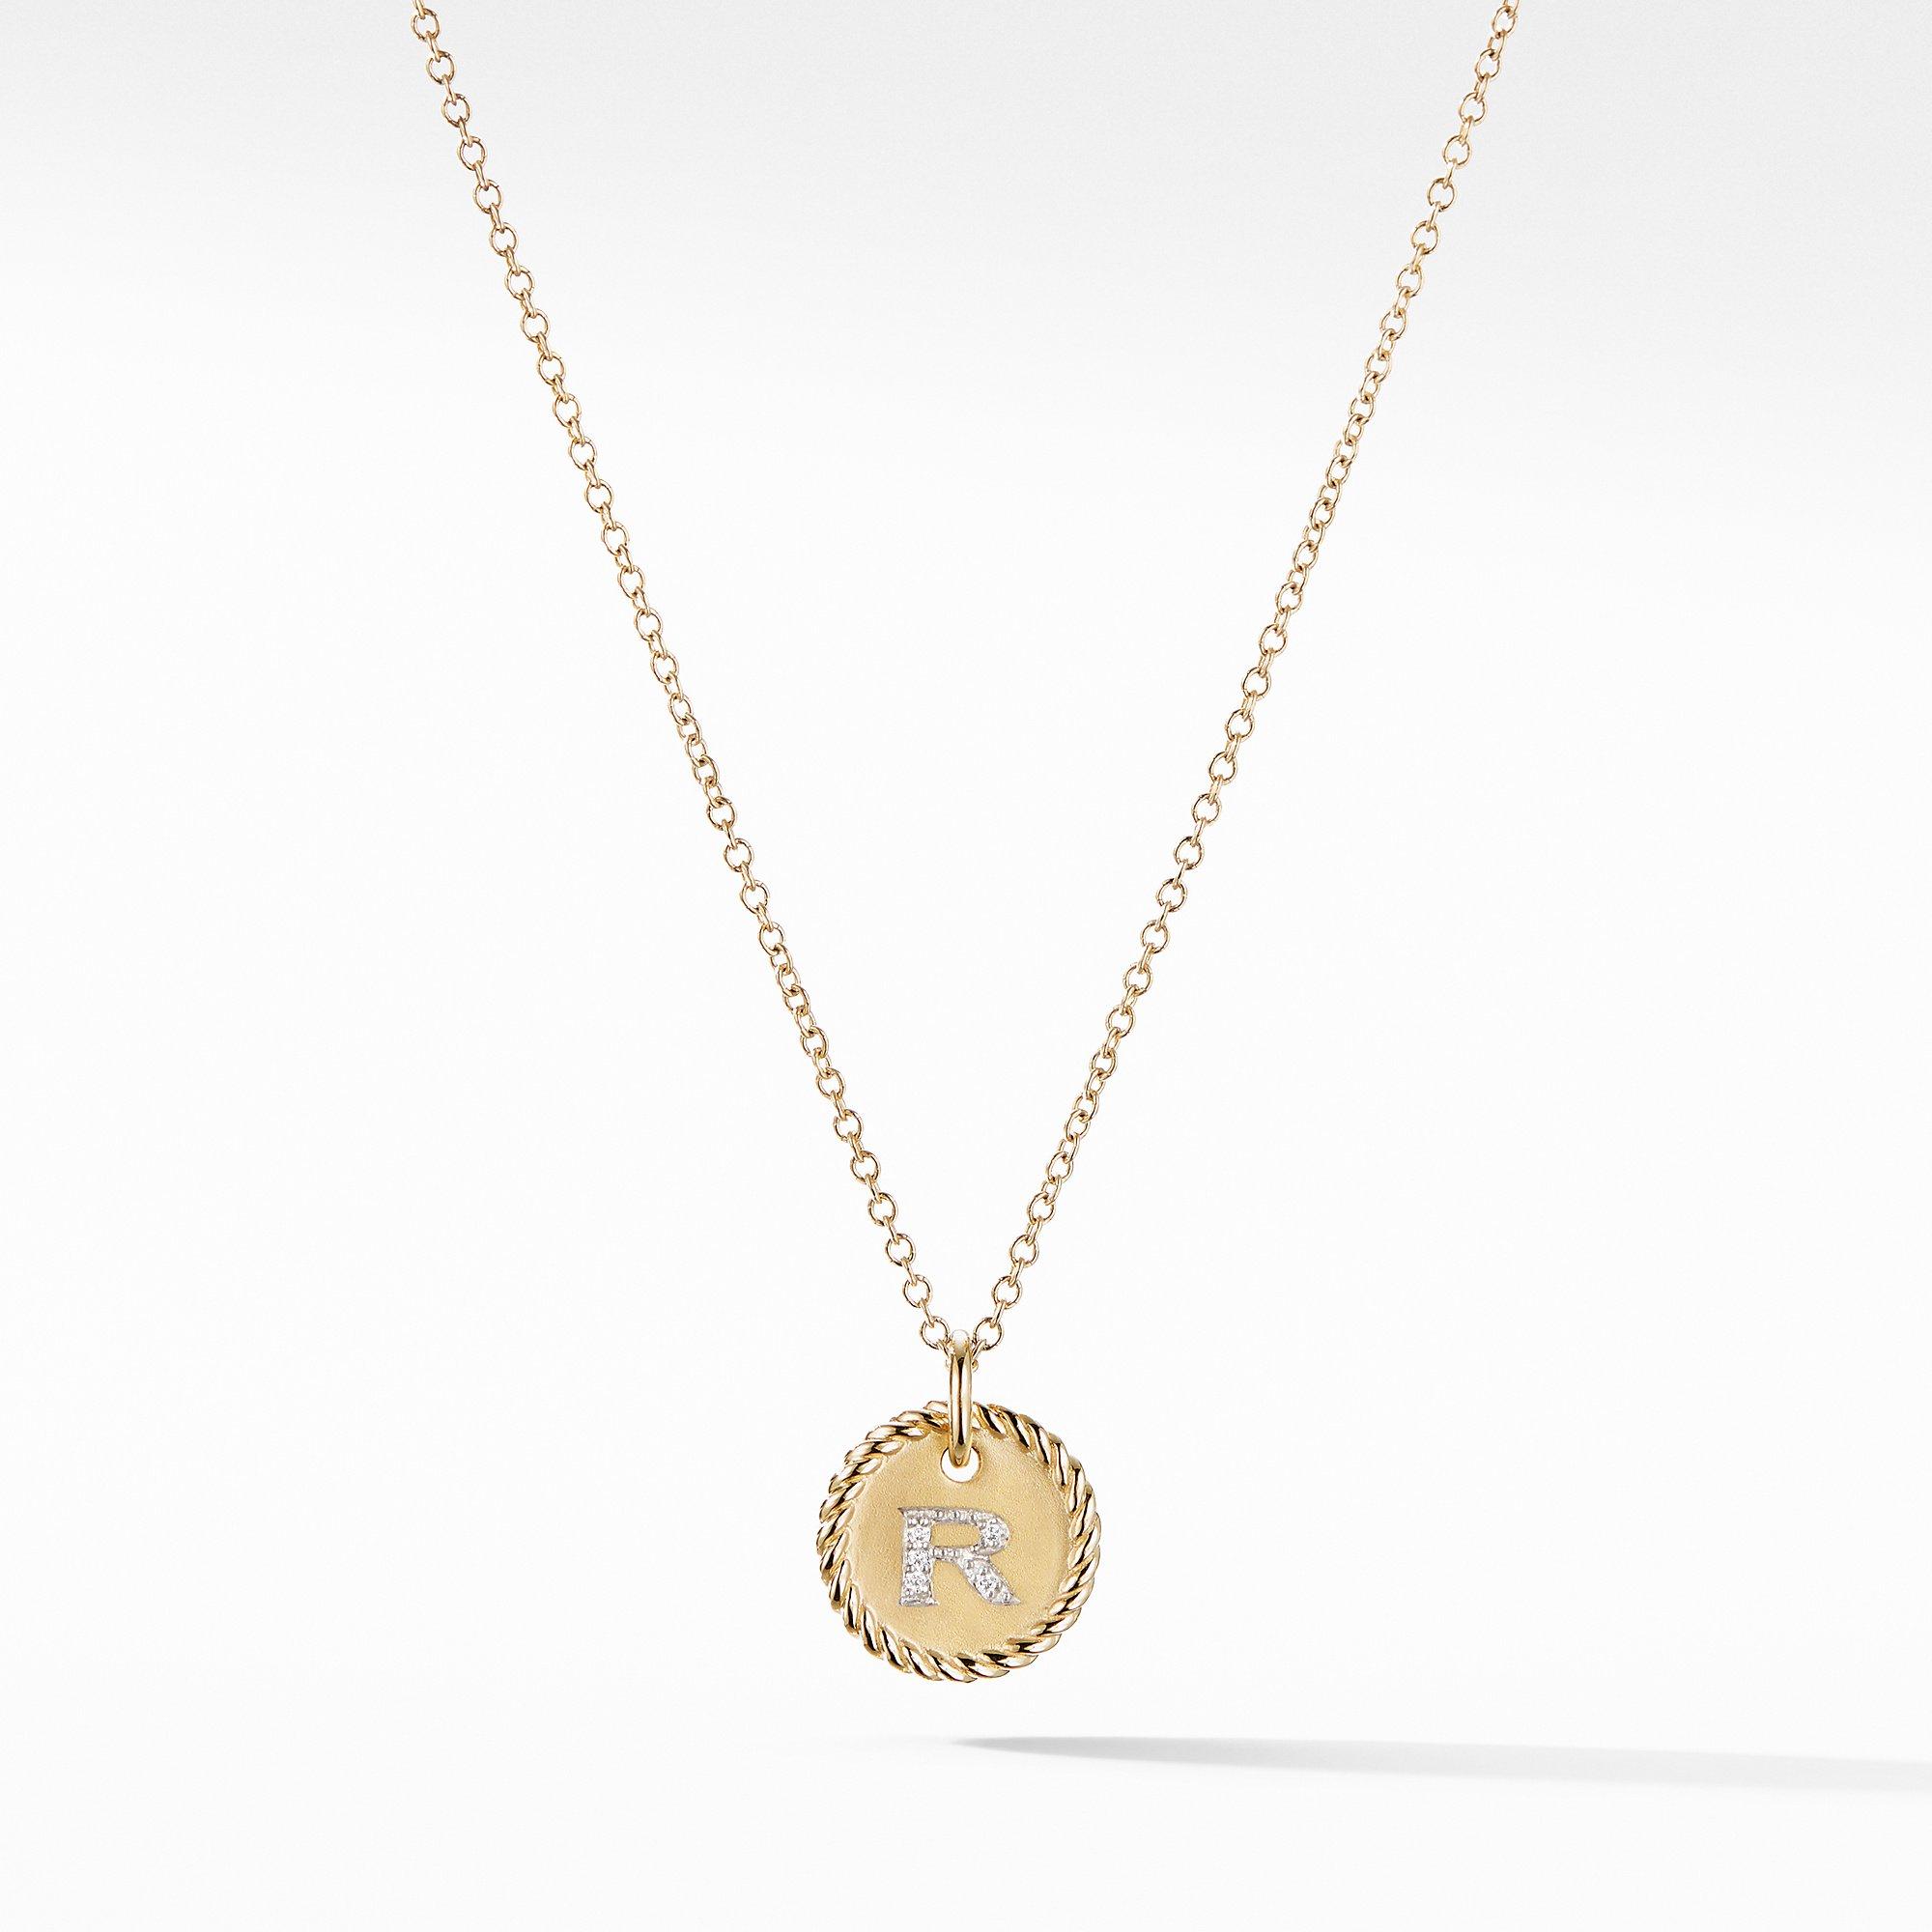 David Yurman R initial Charm Necklace with Diamonds in Yellow Gold